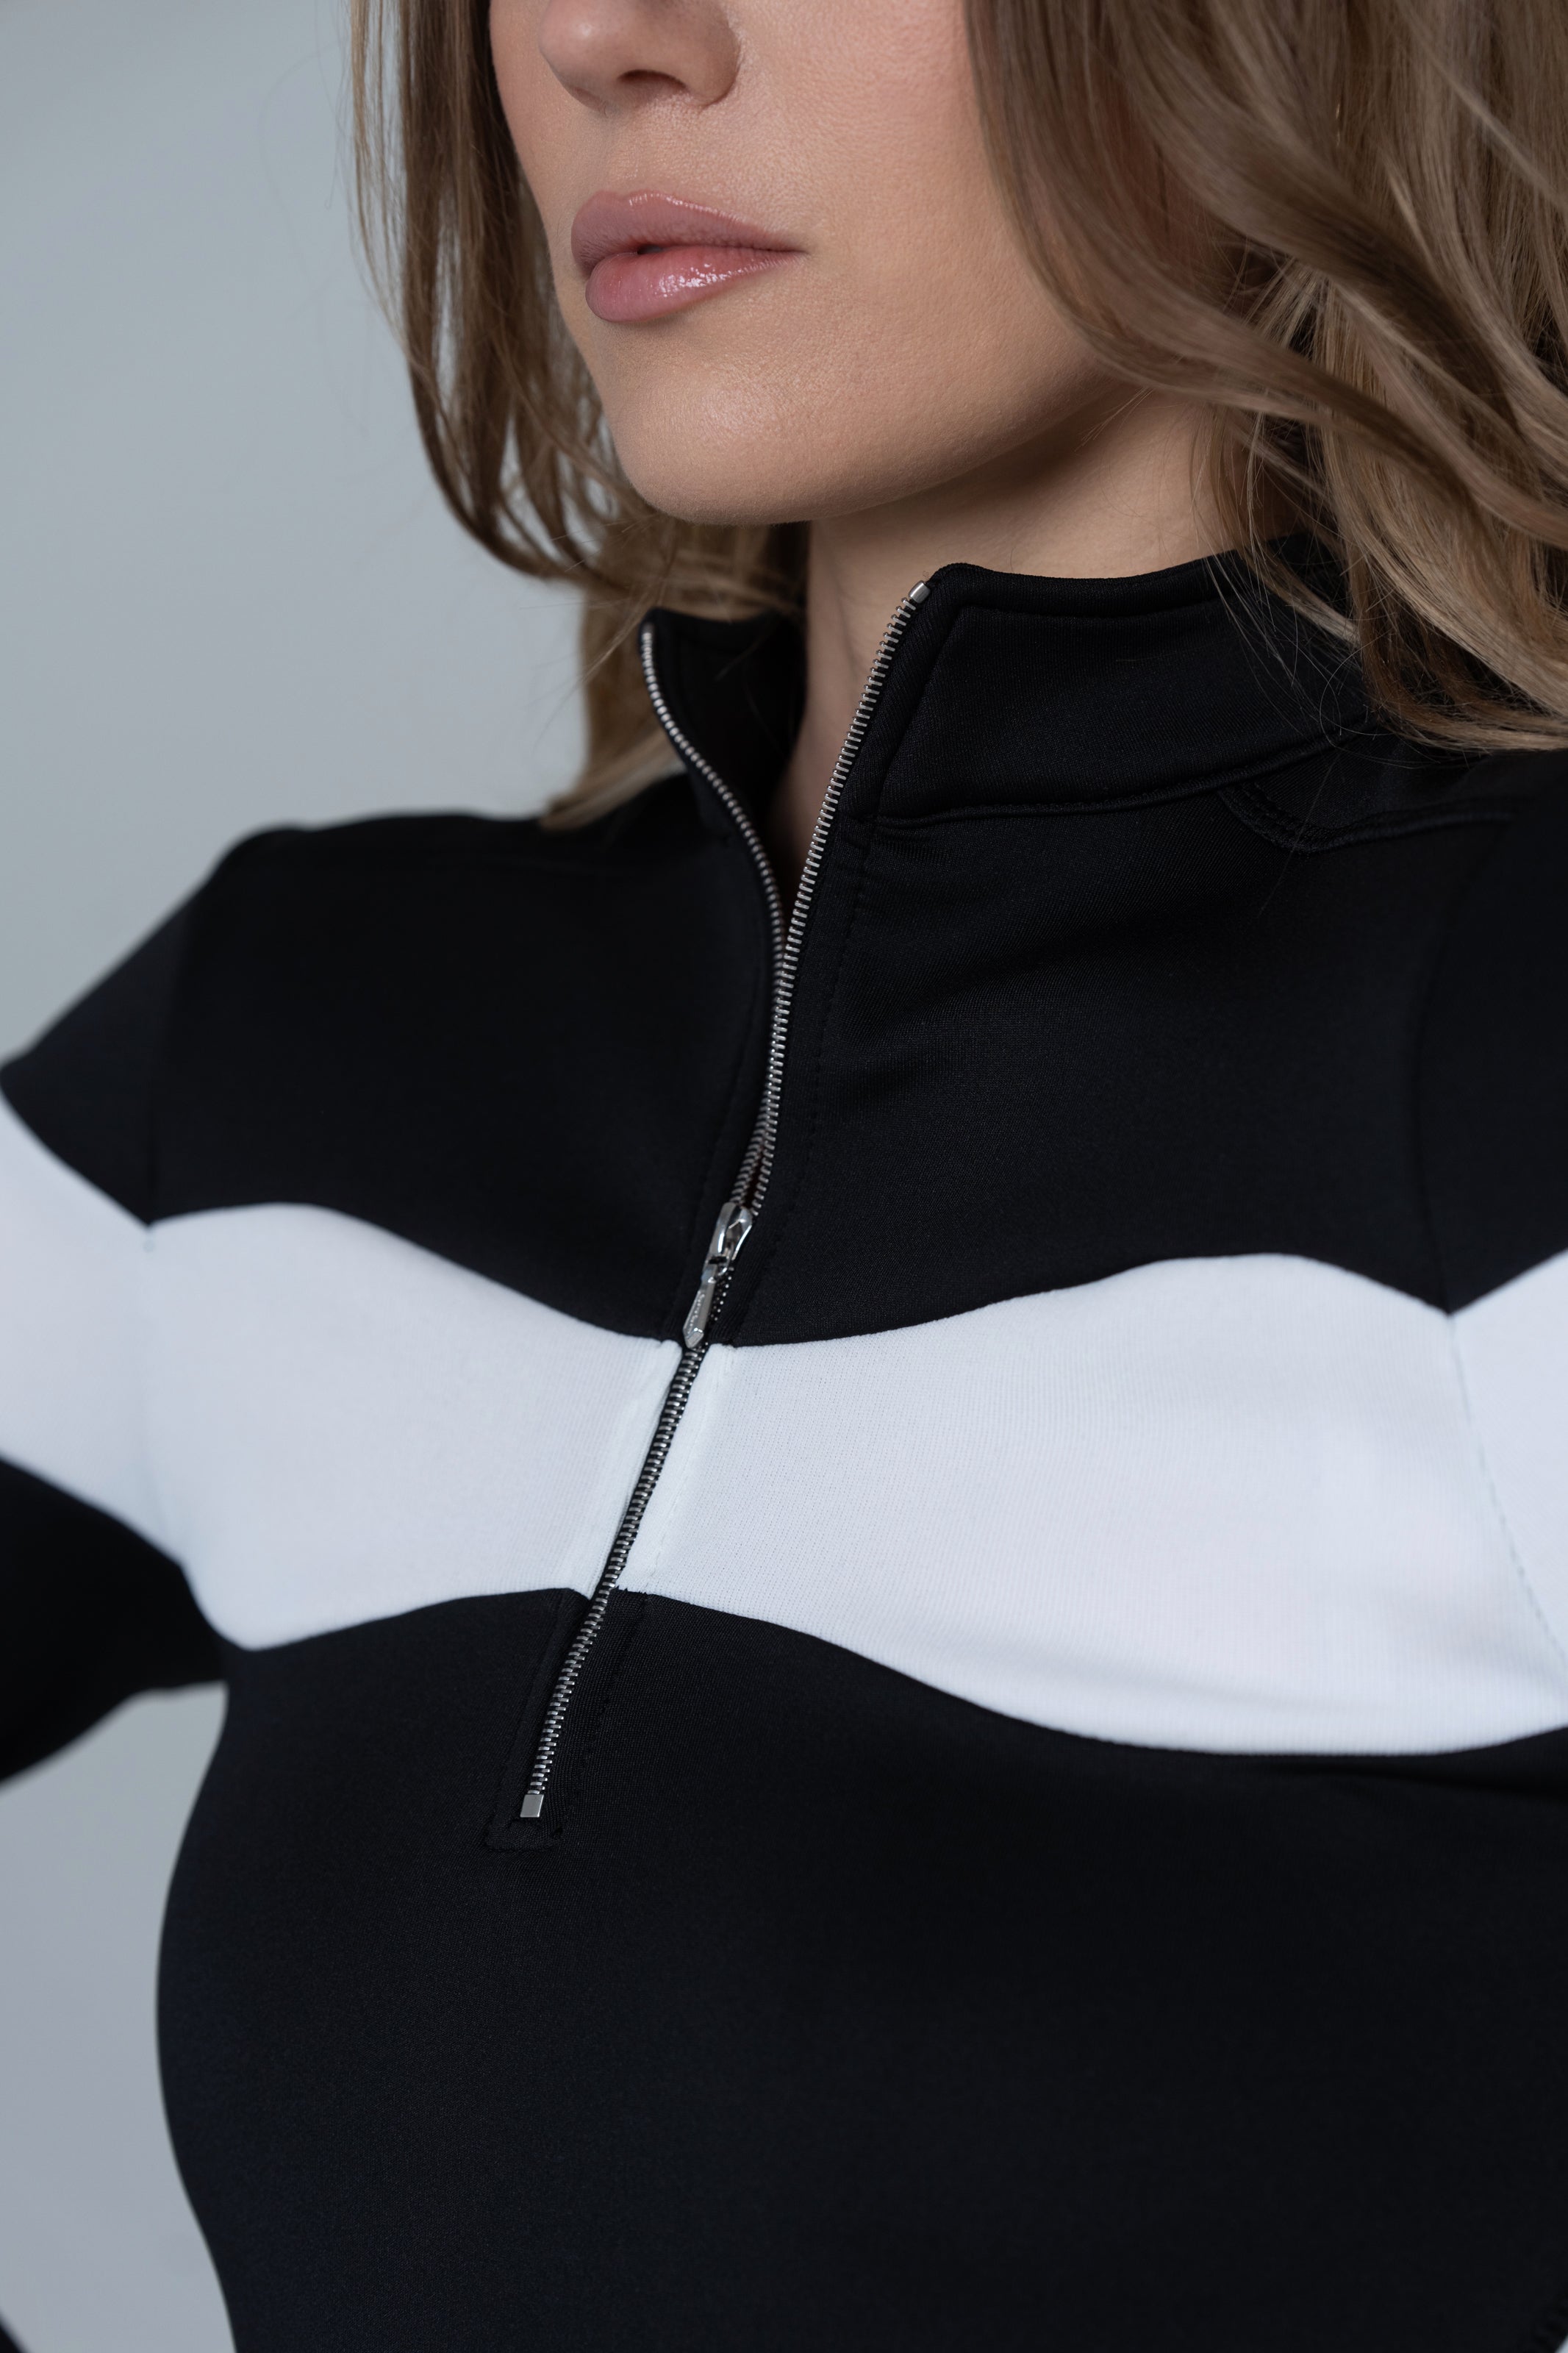 Fitted Serena Long Zipper Top - Black and White - Olivvi World